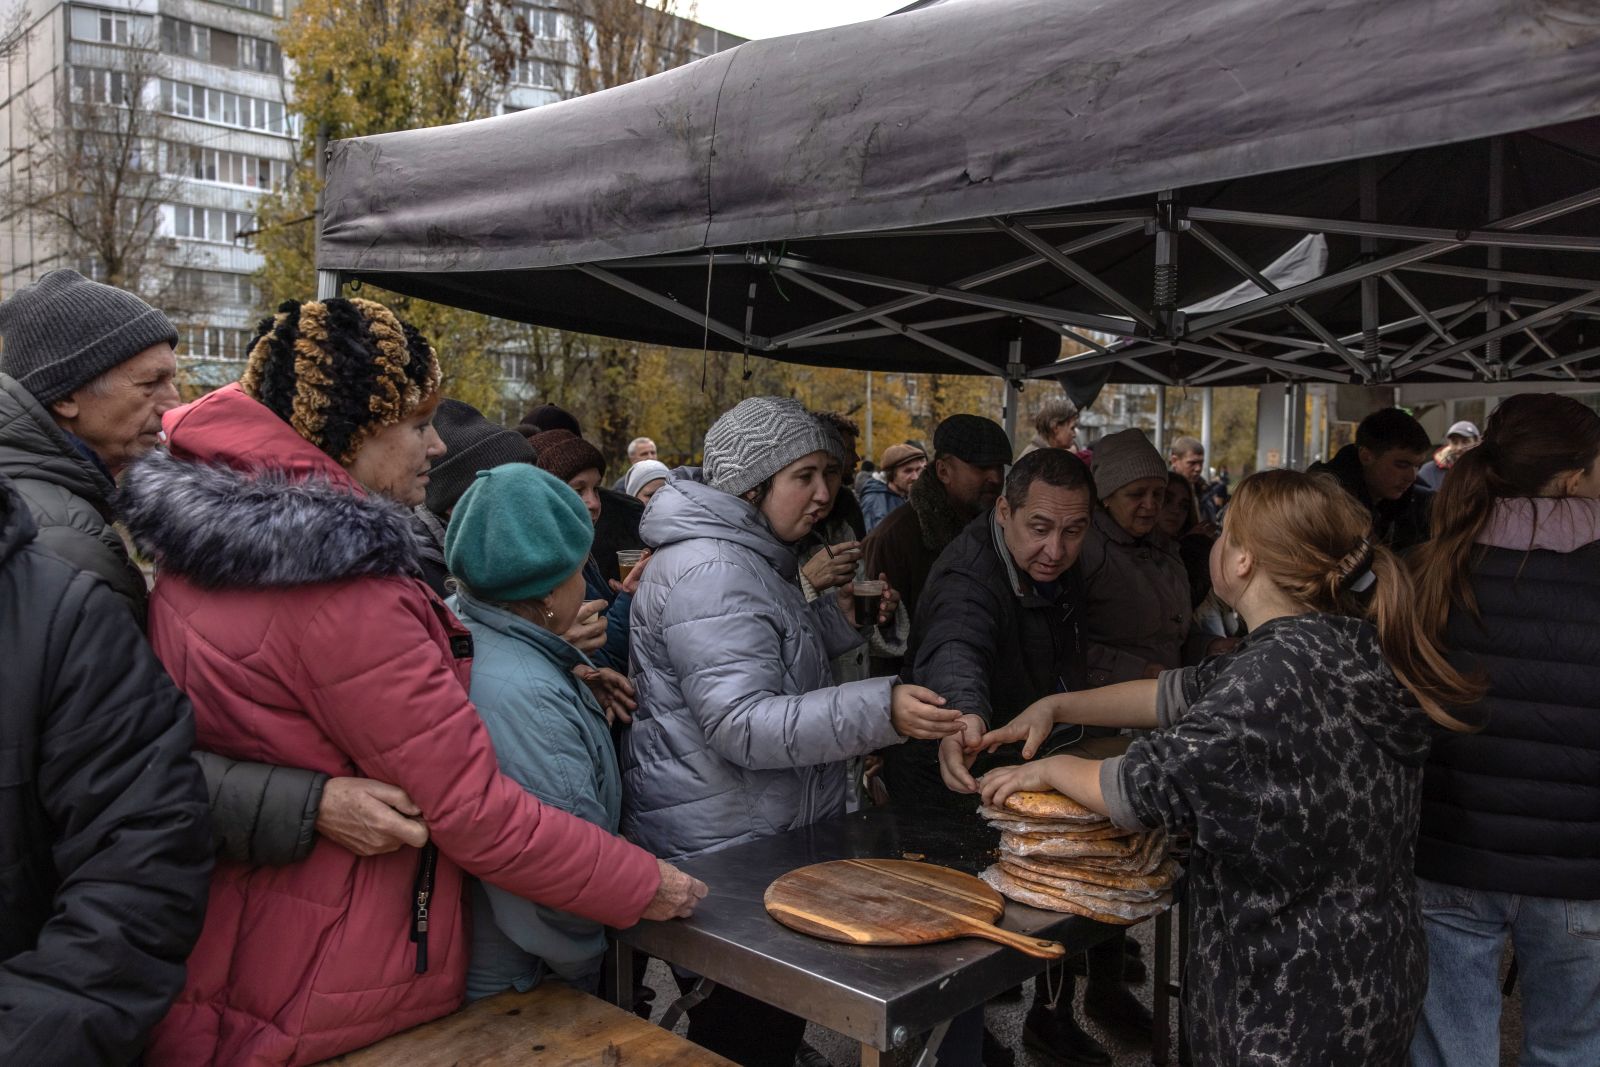 epa10328841 People wait in line to get pizzas from the volunteers, in Kherson, southern Ukraine, 24 November 2022 (issued 25 November 2022). Together with his volunteer team, Tom has been moving in vans all around Ukraine cooking free pizzas for people in need since the early stage of the Russian invasion. His team includes people from different countries, and every day they are able to make around three to four thousand pizzas, the ingredients for which they get from Italy. For now they will be volunteering in Kherson. Speaking about his plans Tom says he wants to keep working till the Ukrainian be victorous in the war.  EPA/ROMAN PILIPEY ATTENTION: This Image is part of a PHOTO SET